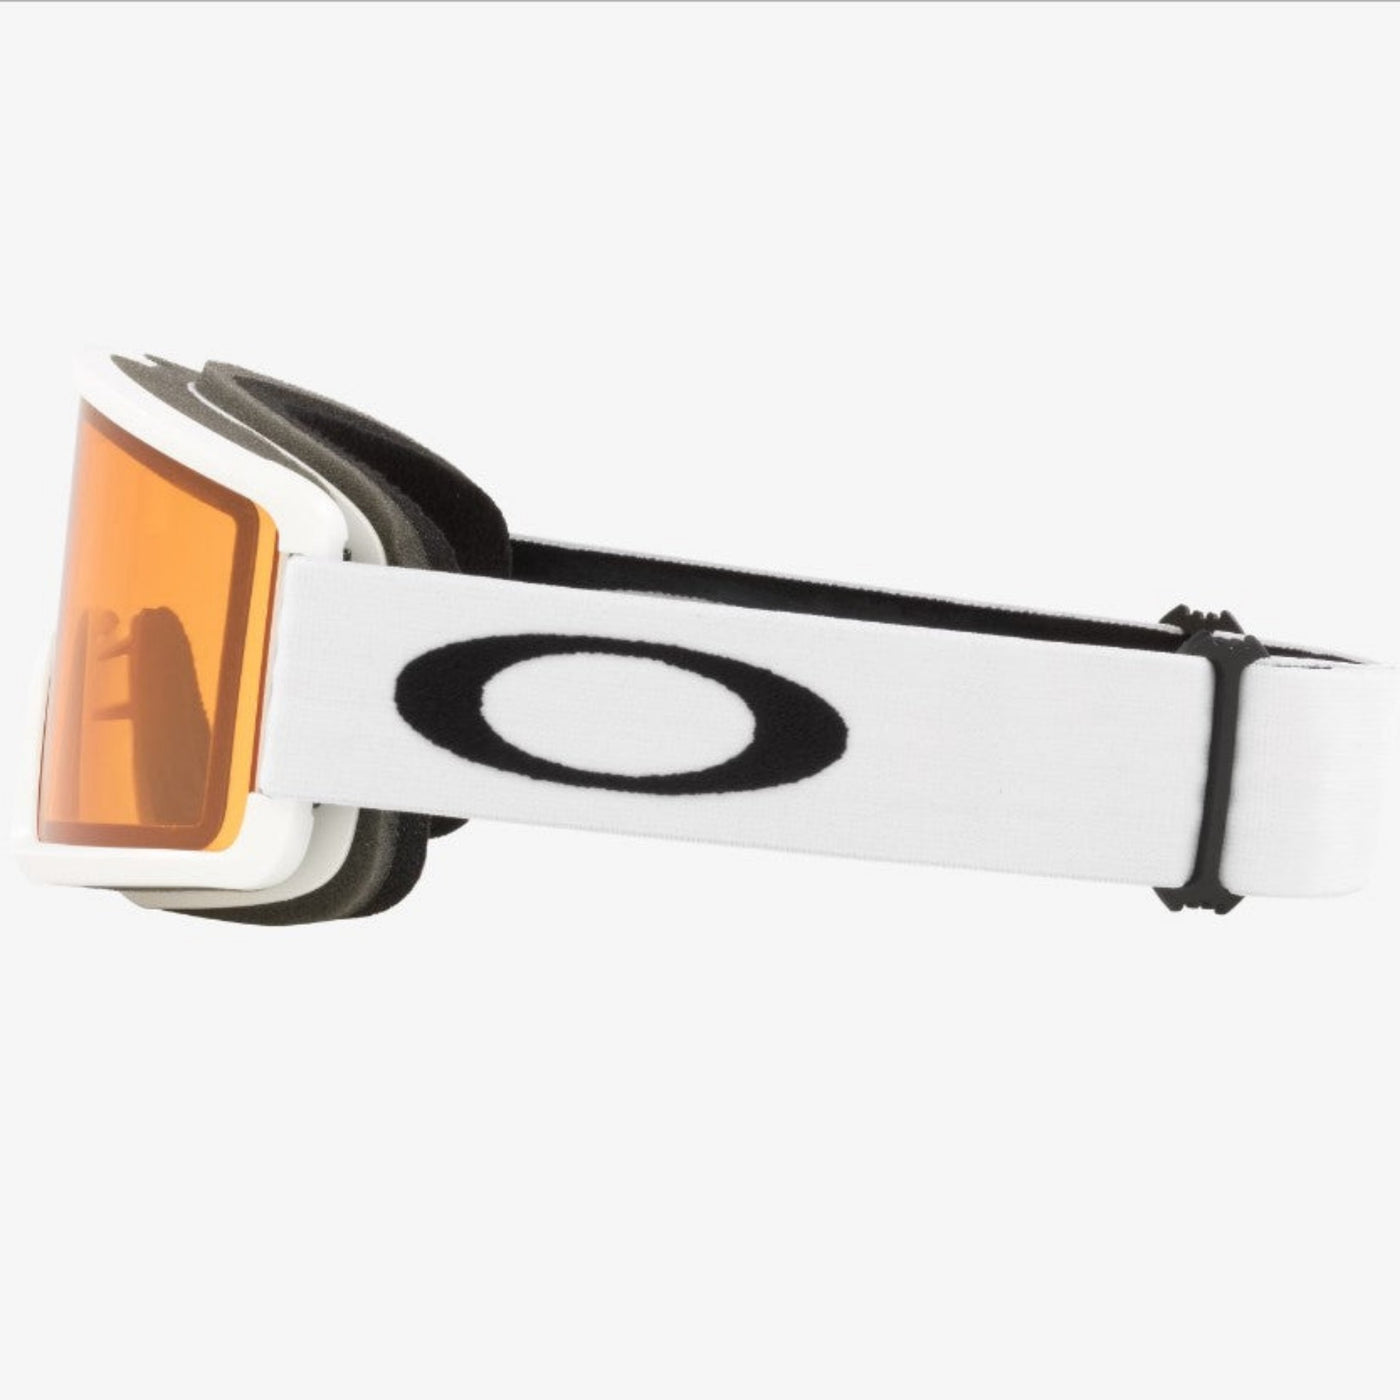 Oakley Target Line - White, Persimmon Lens (Large)